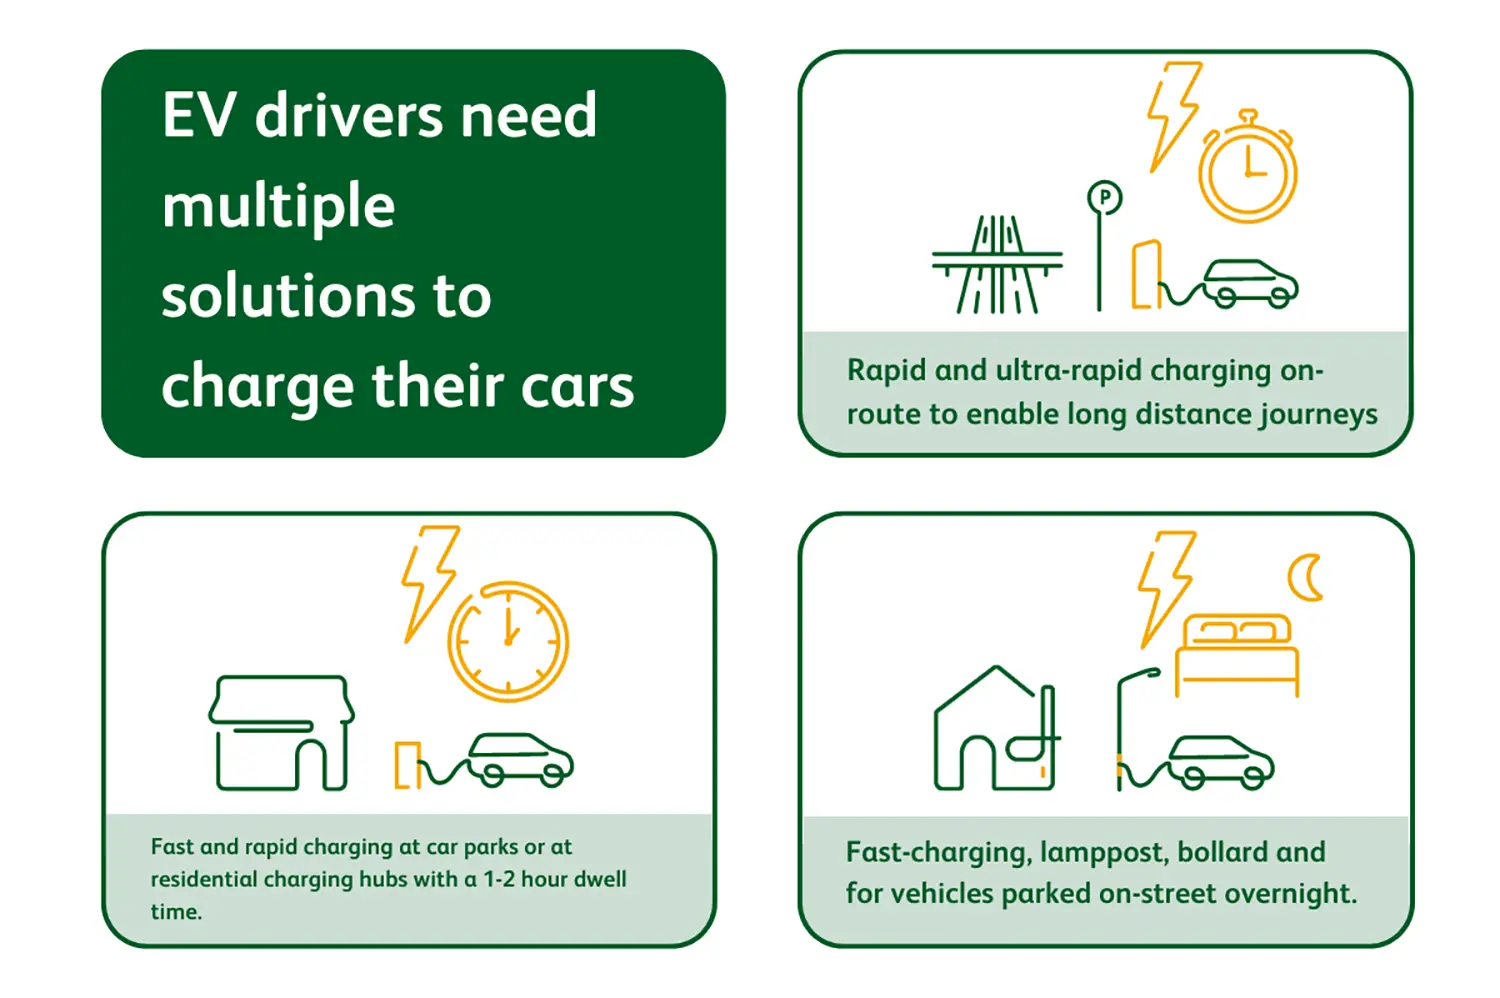 Infographic showing that the ideal EV charging infrastructure includes a mix of rapid, fast and standard charging to best support drivers' needs.